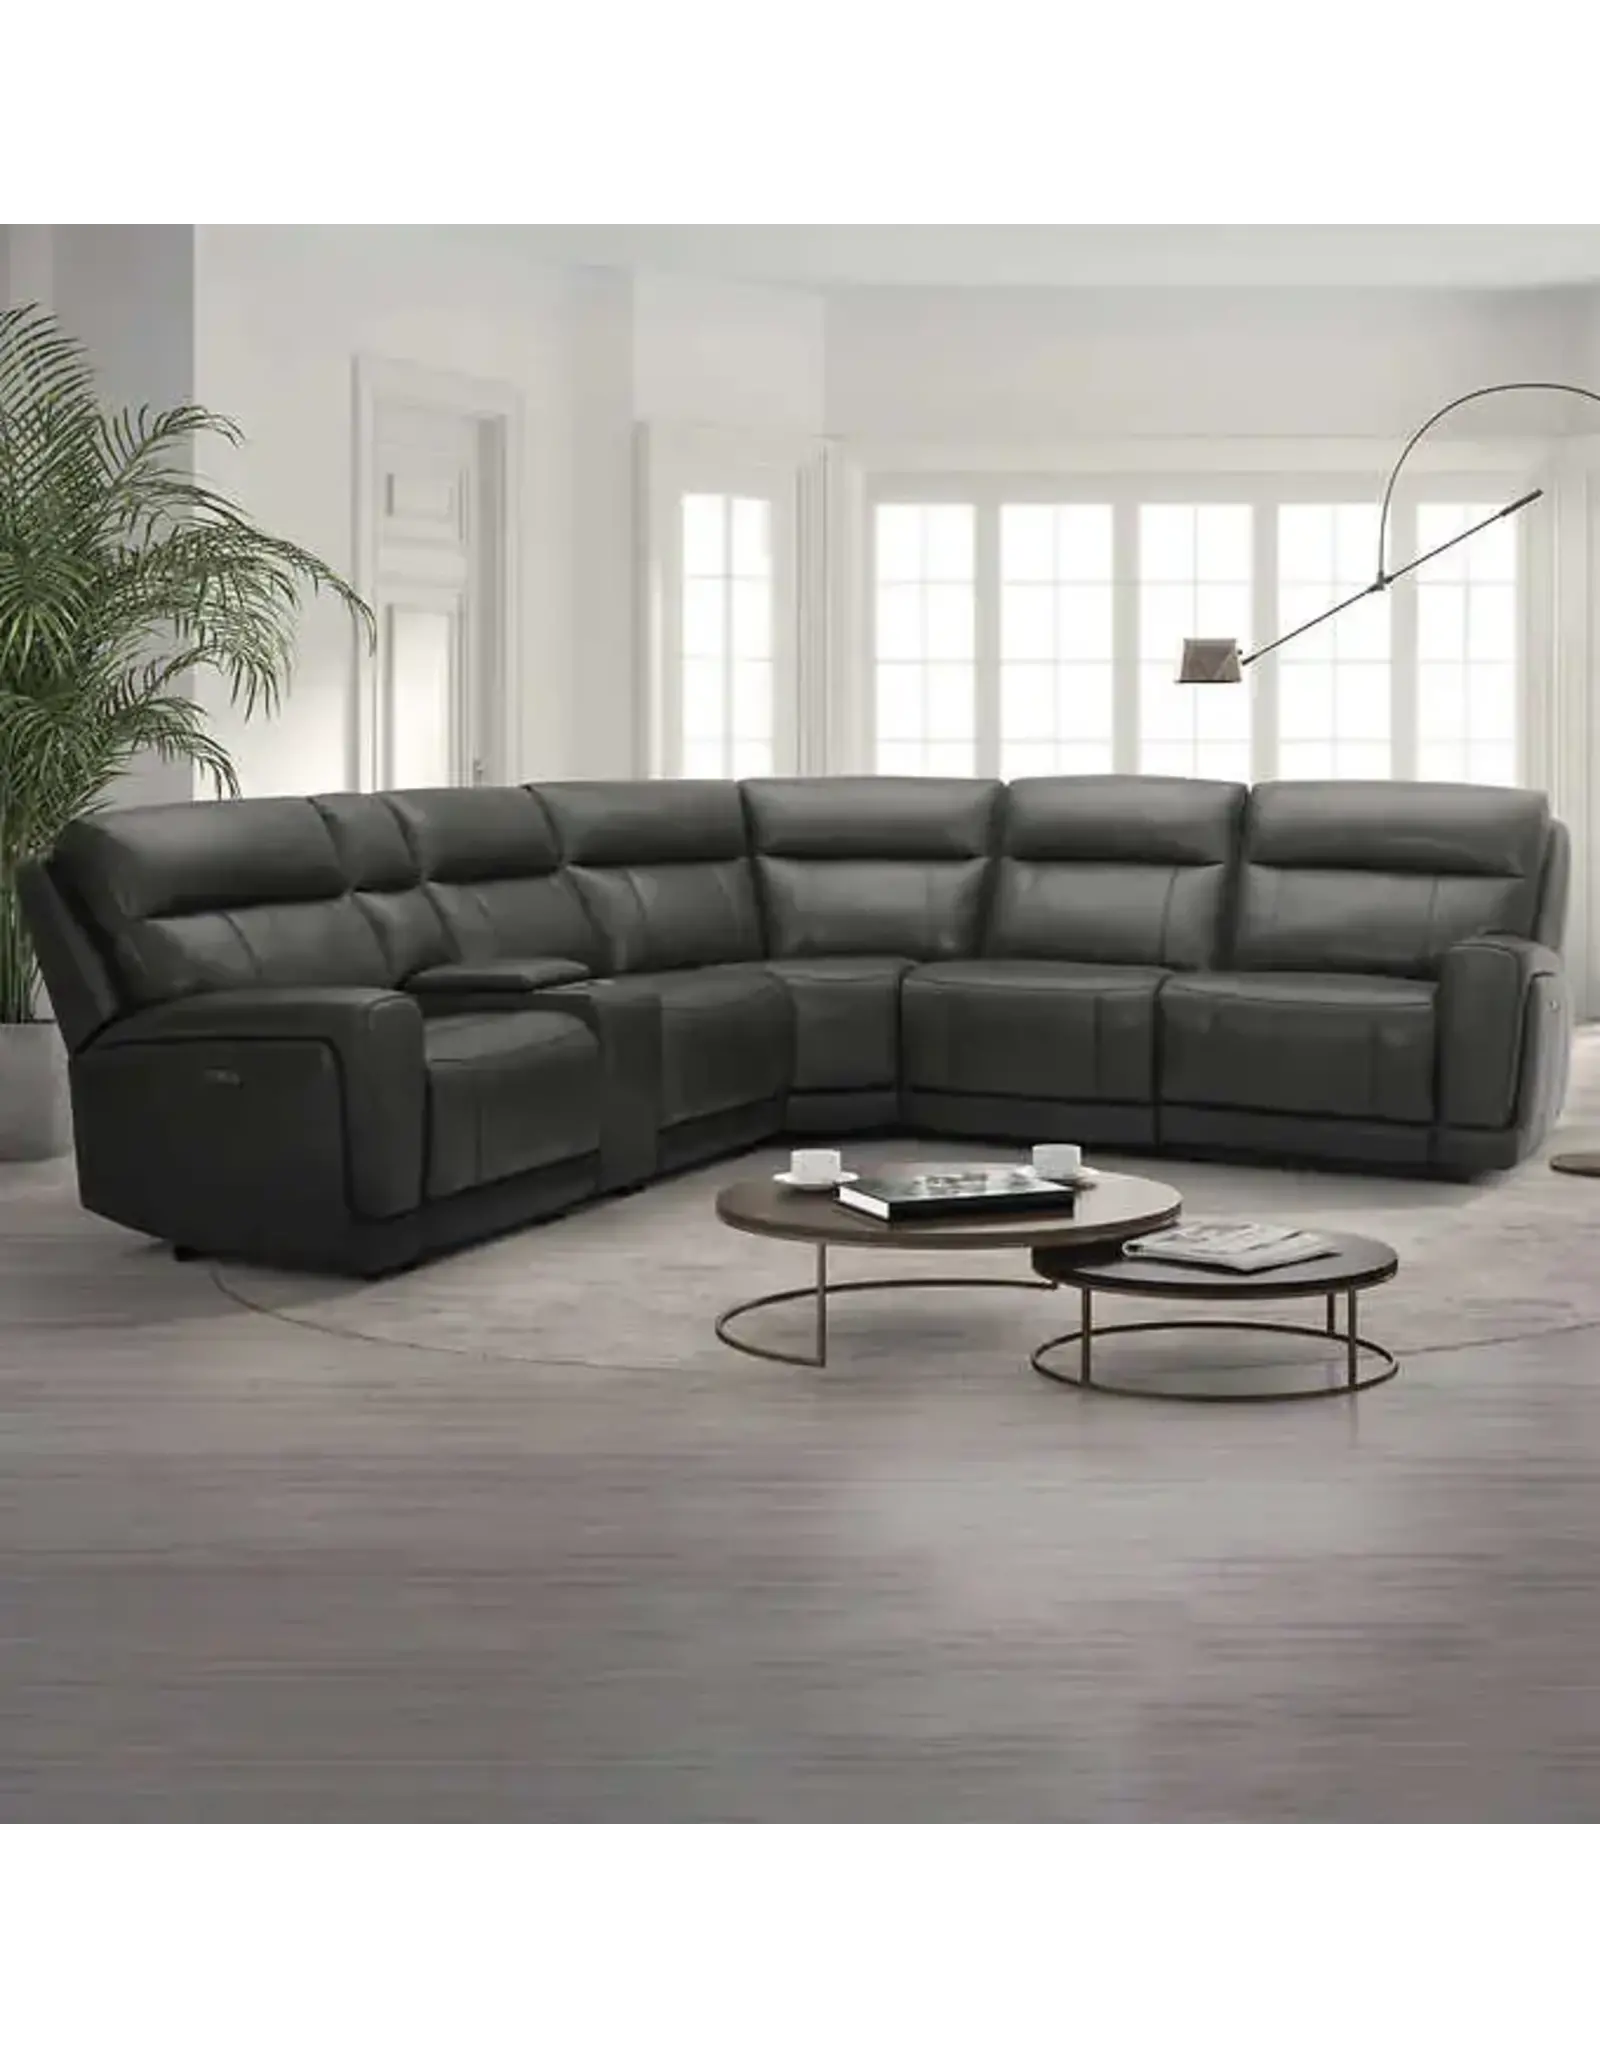 GILMAN CREEK FURNITURE 1653287 Lauretta 6-piece Leather Power Reclining Sectional with Power Headrests